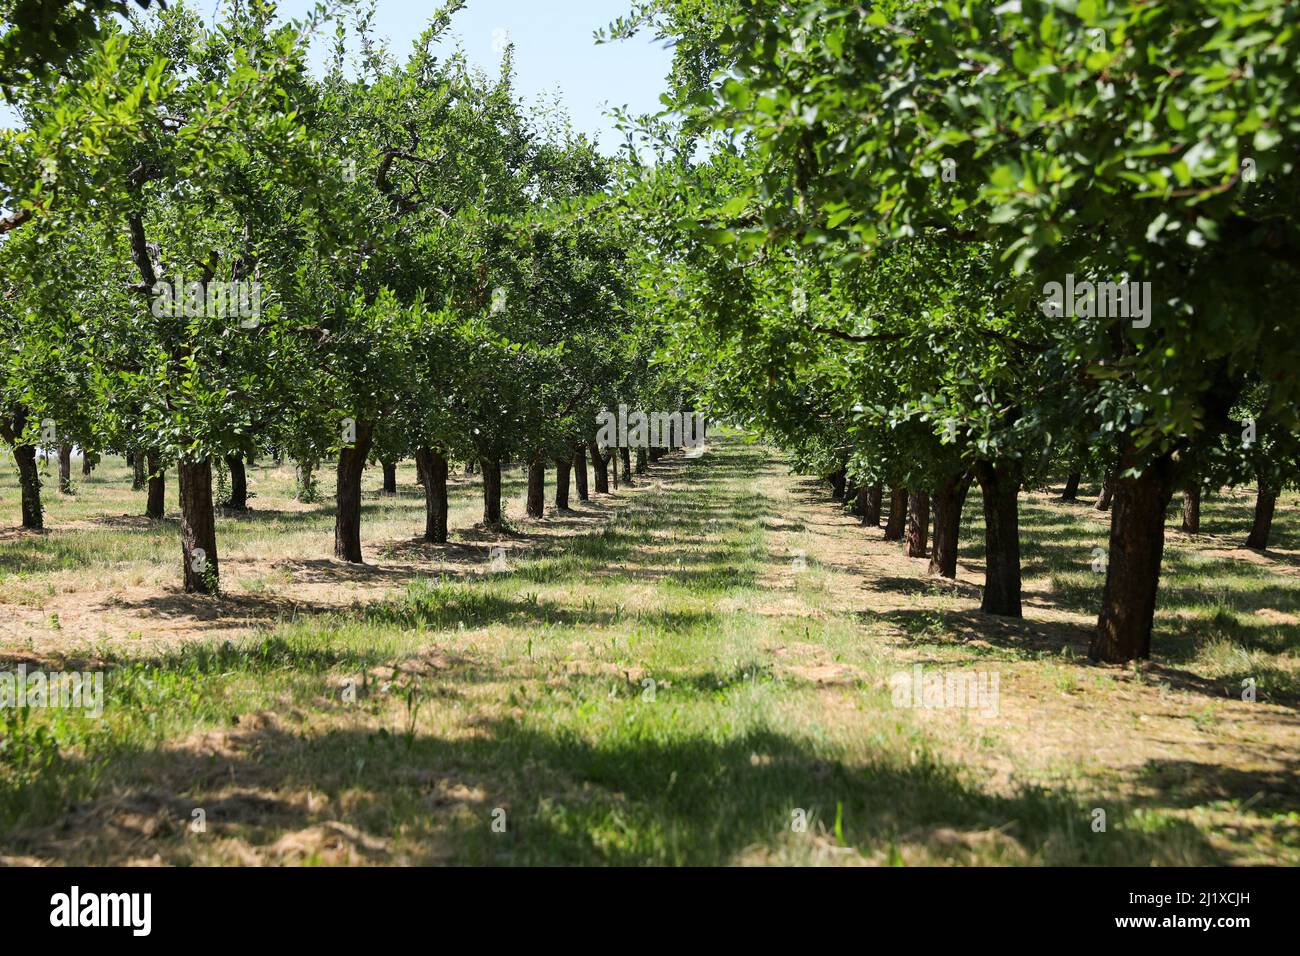 Orchard of Ente plum trees for the cultivation of Agen prunes Stock Photo